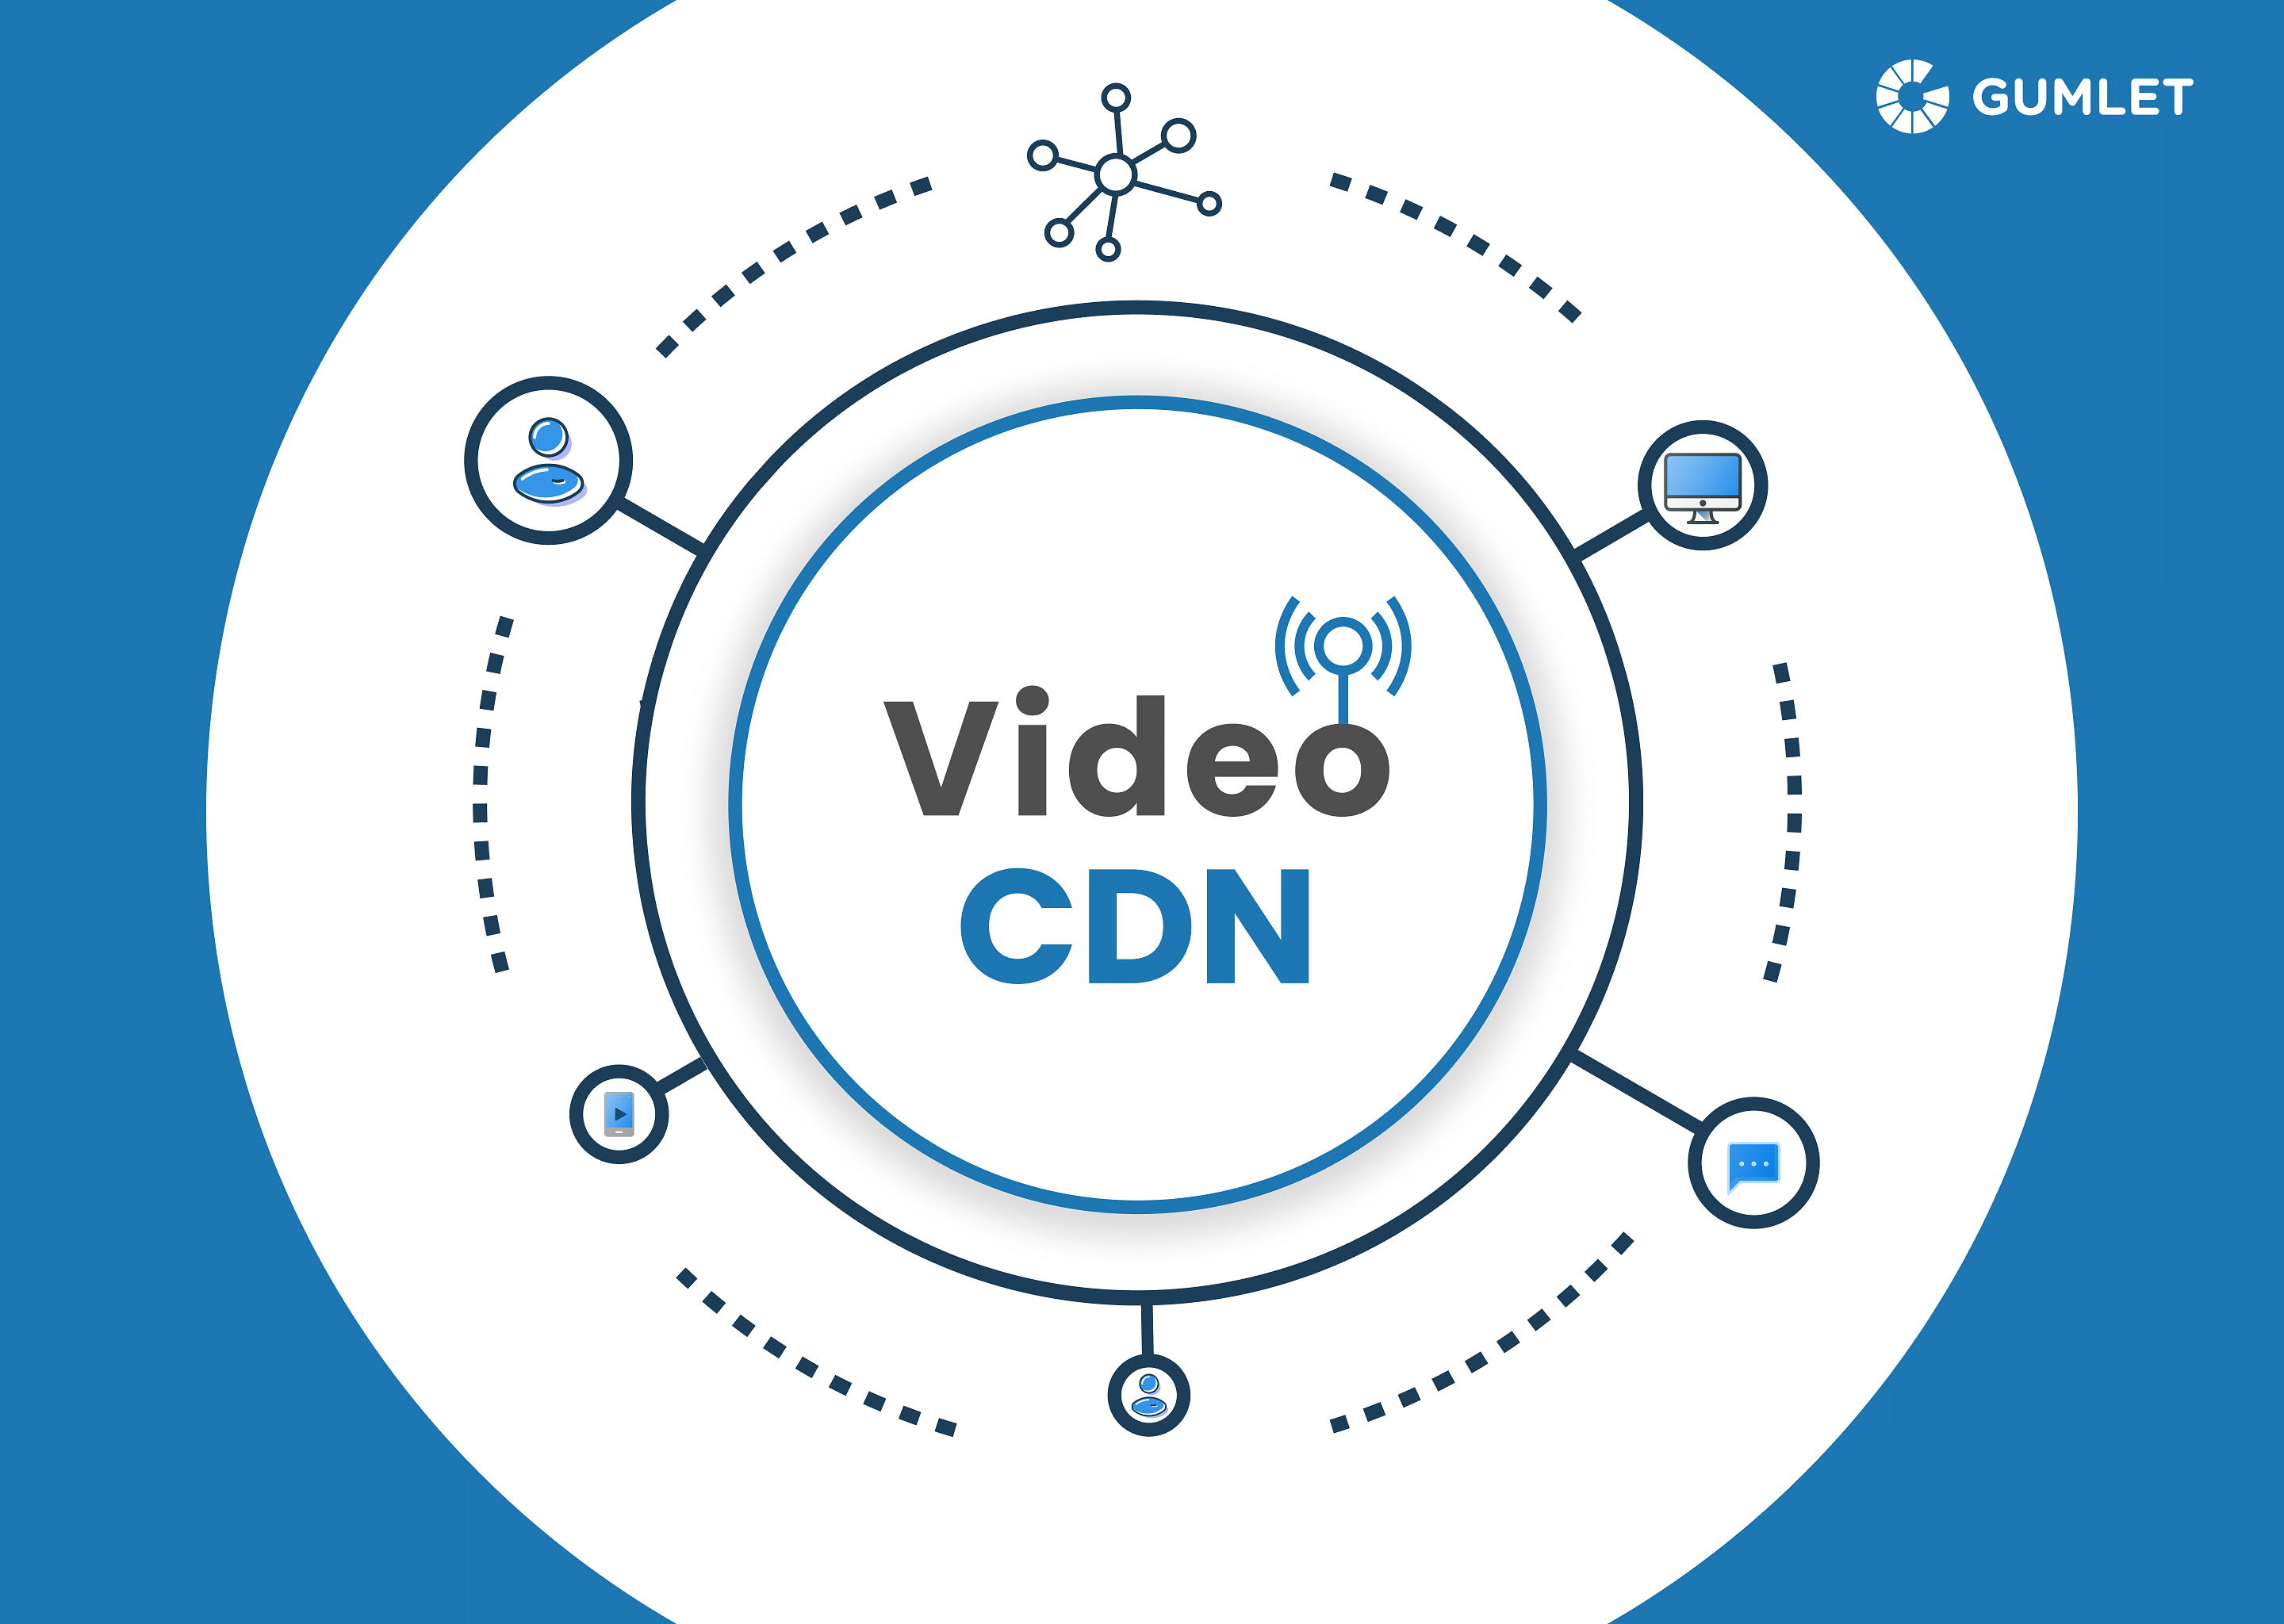 Why Video CDN is Important for Streaming Video?